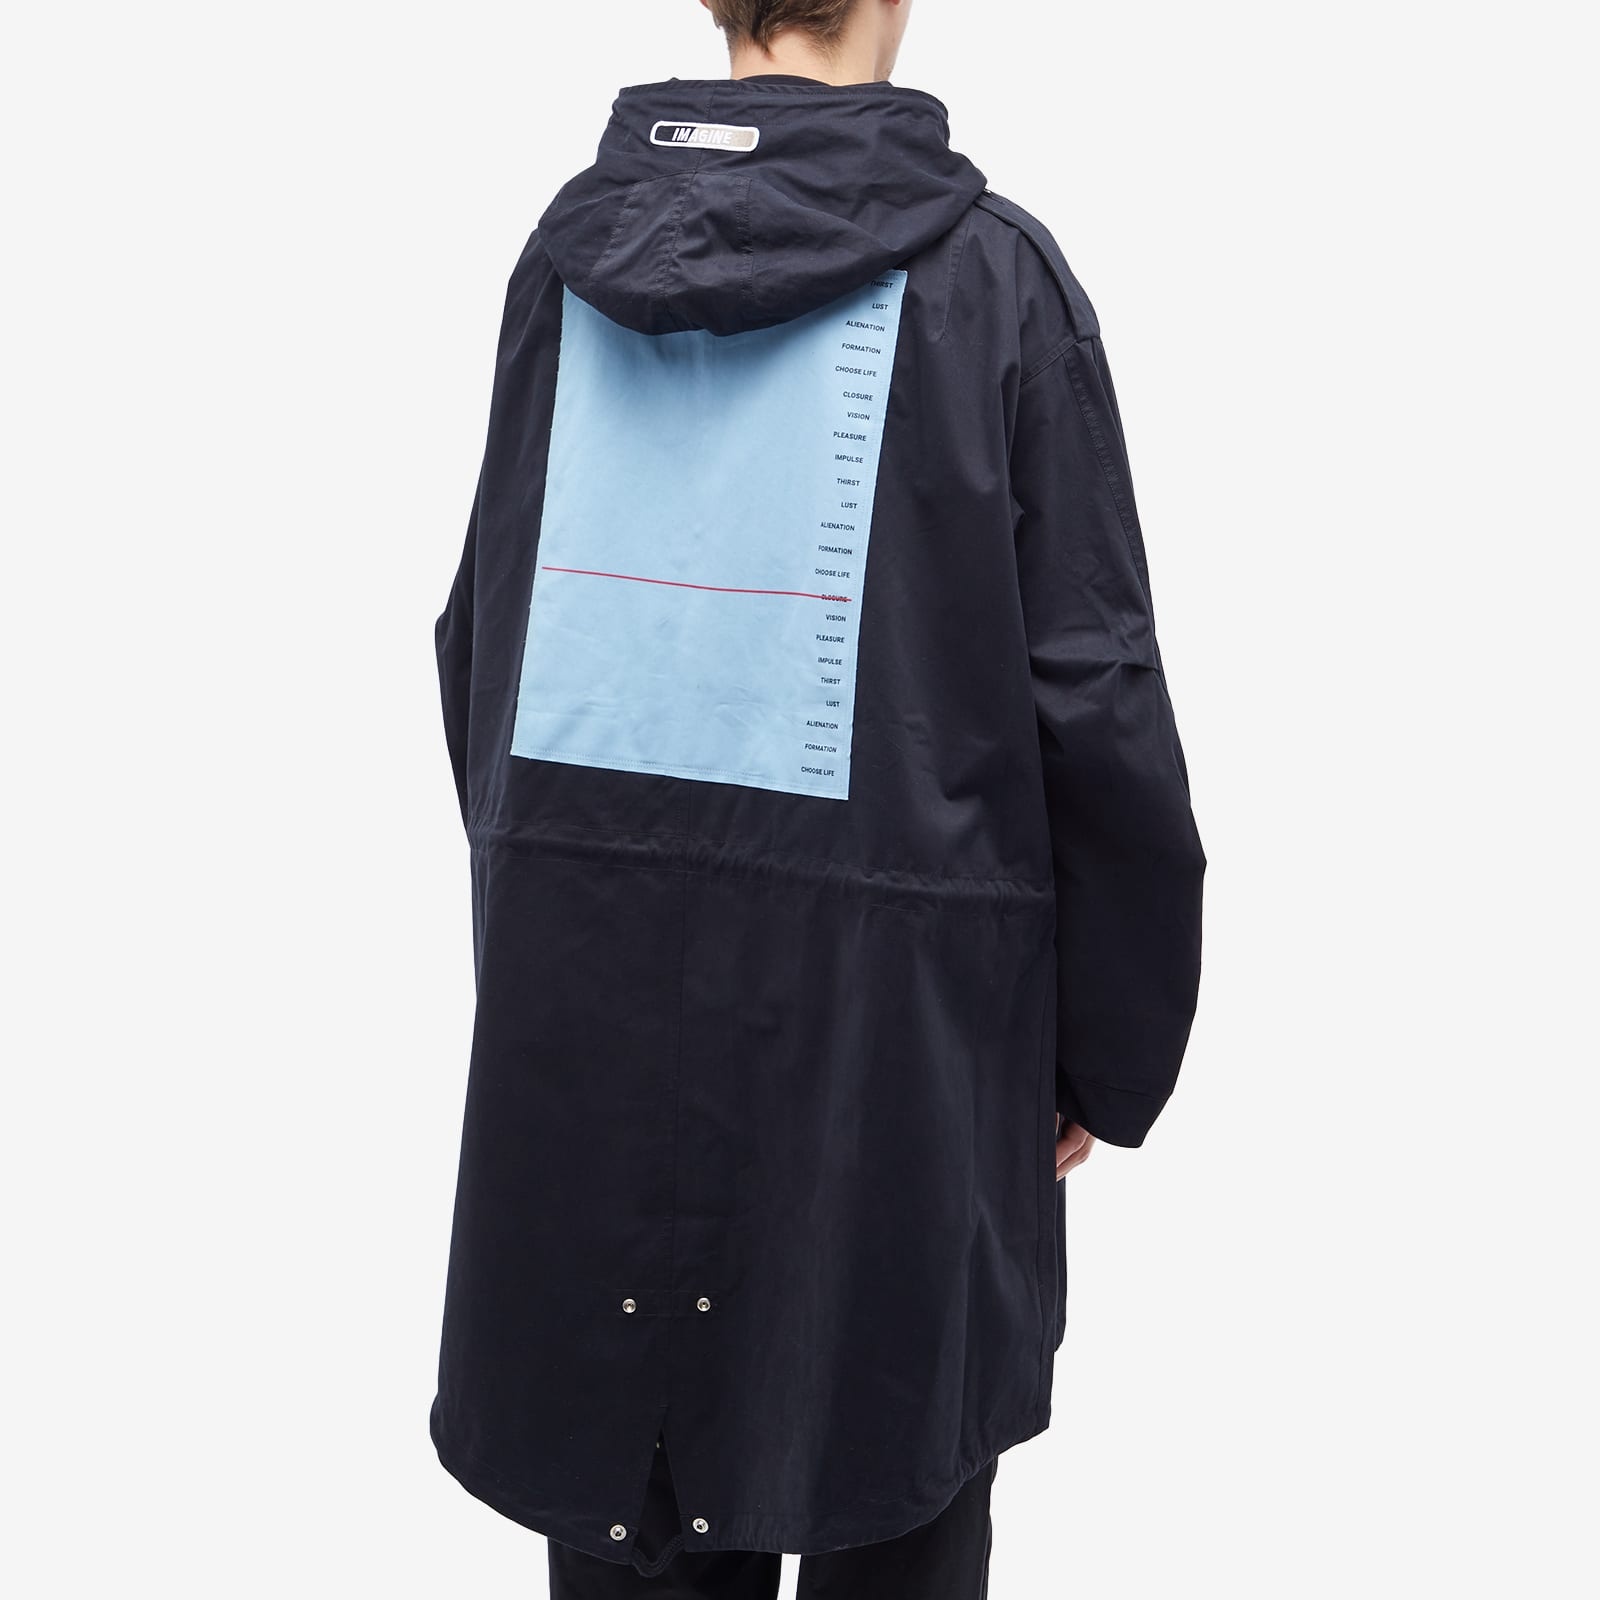 Fred Perry x Raf Simons Printed Patch Parka - 3